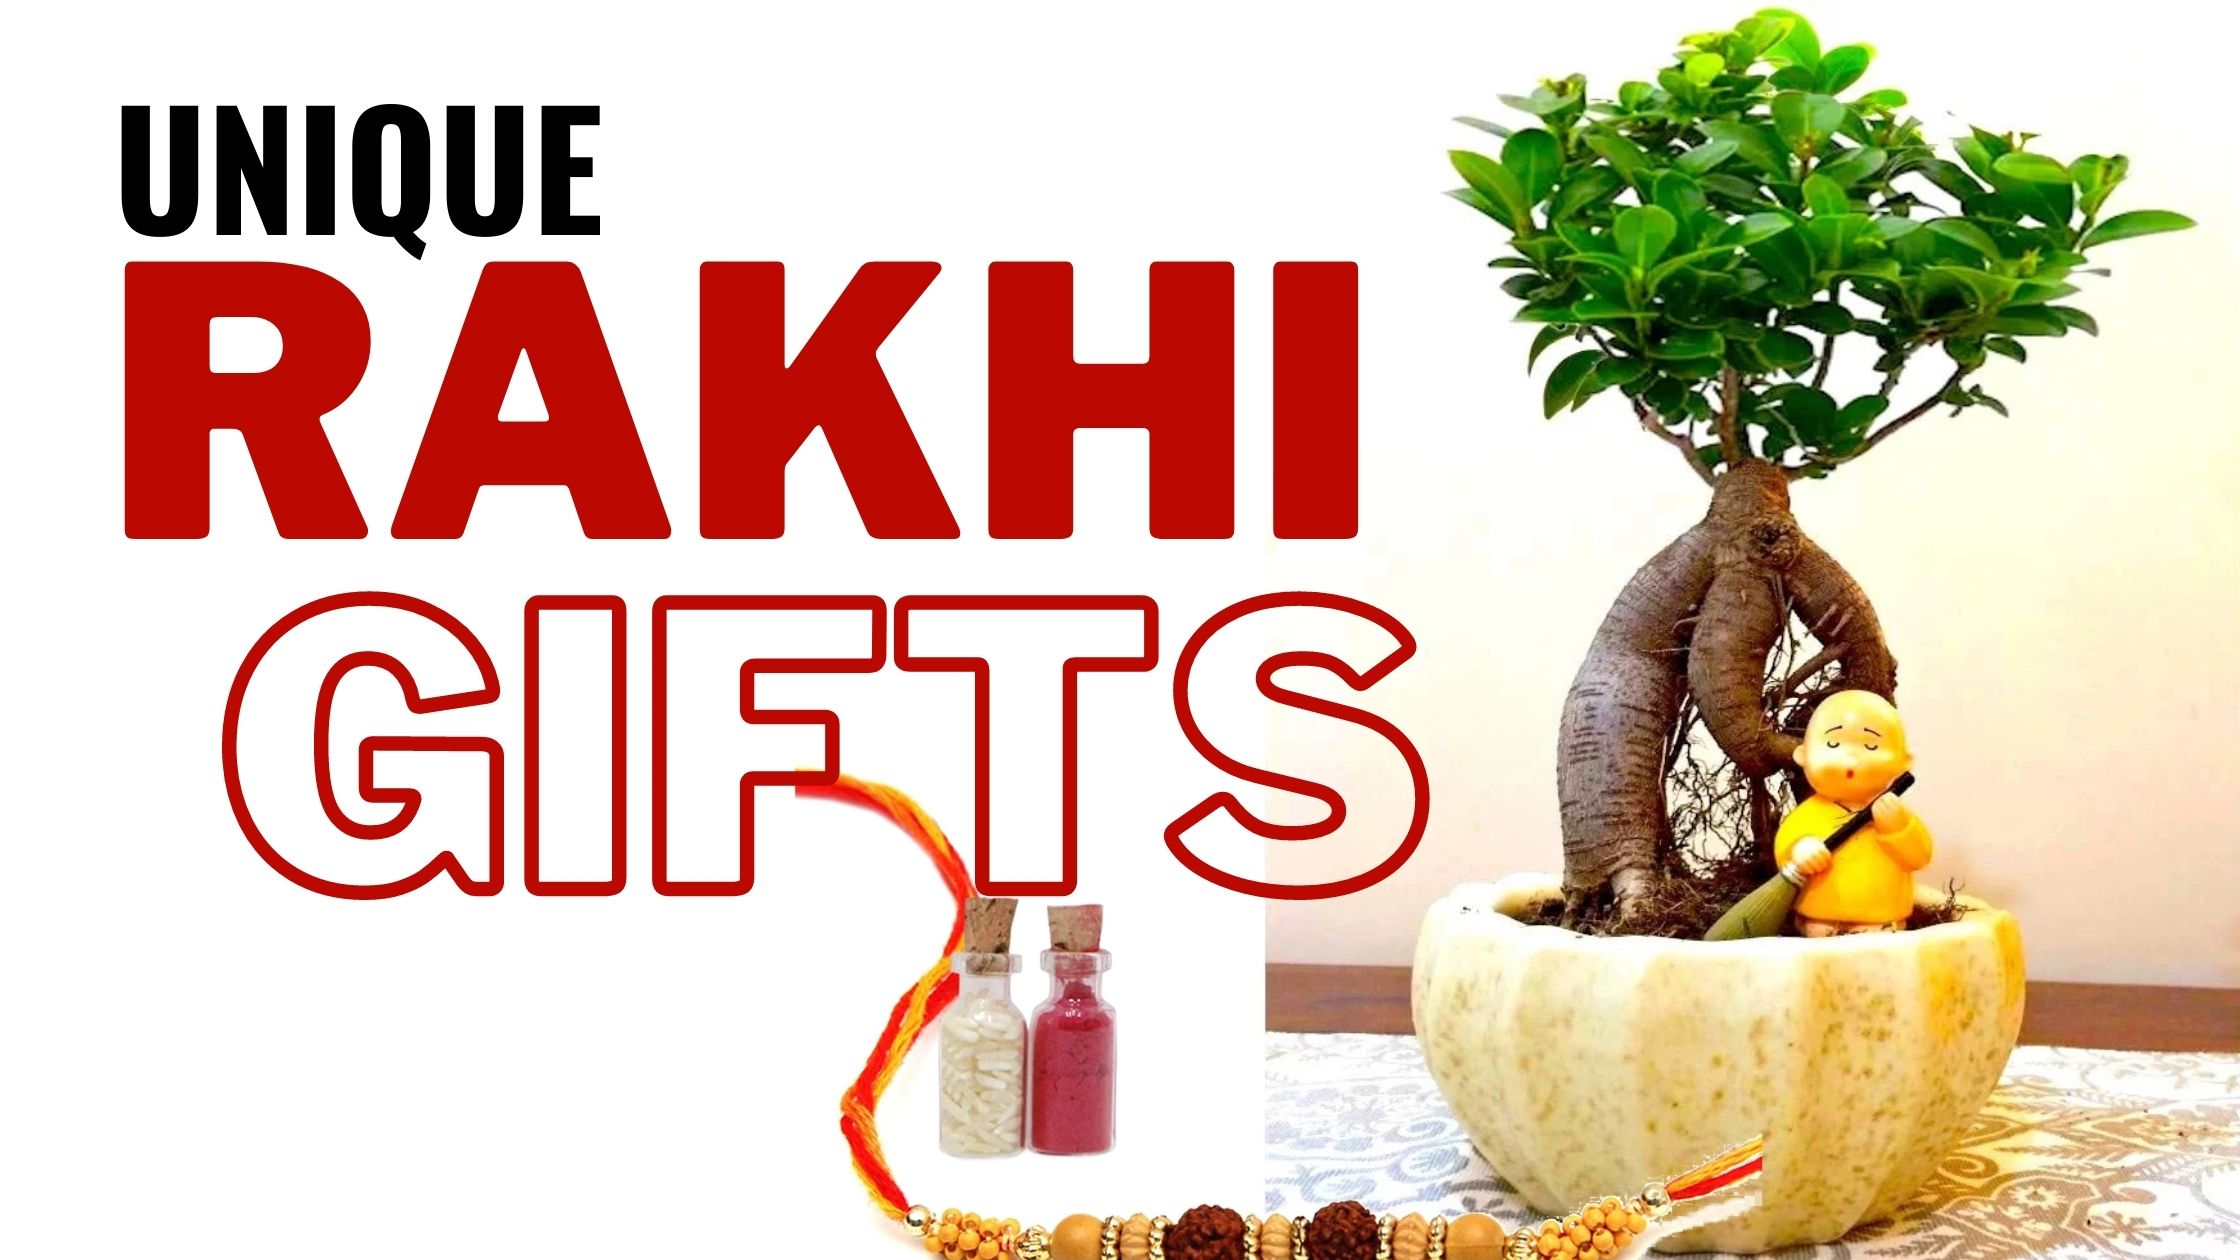 8 funny Rakhi gifts to tease your sister – Bigsmall.in